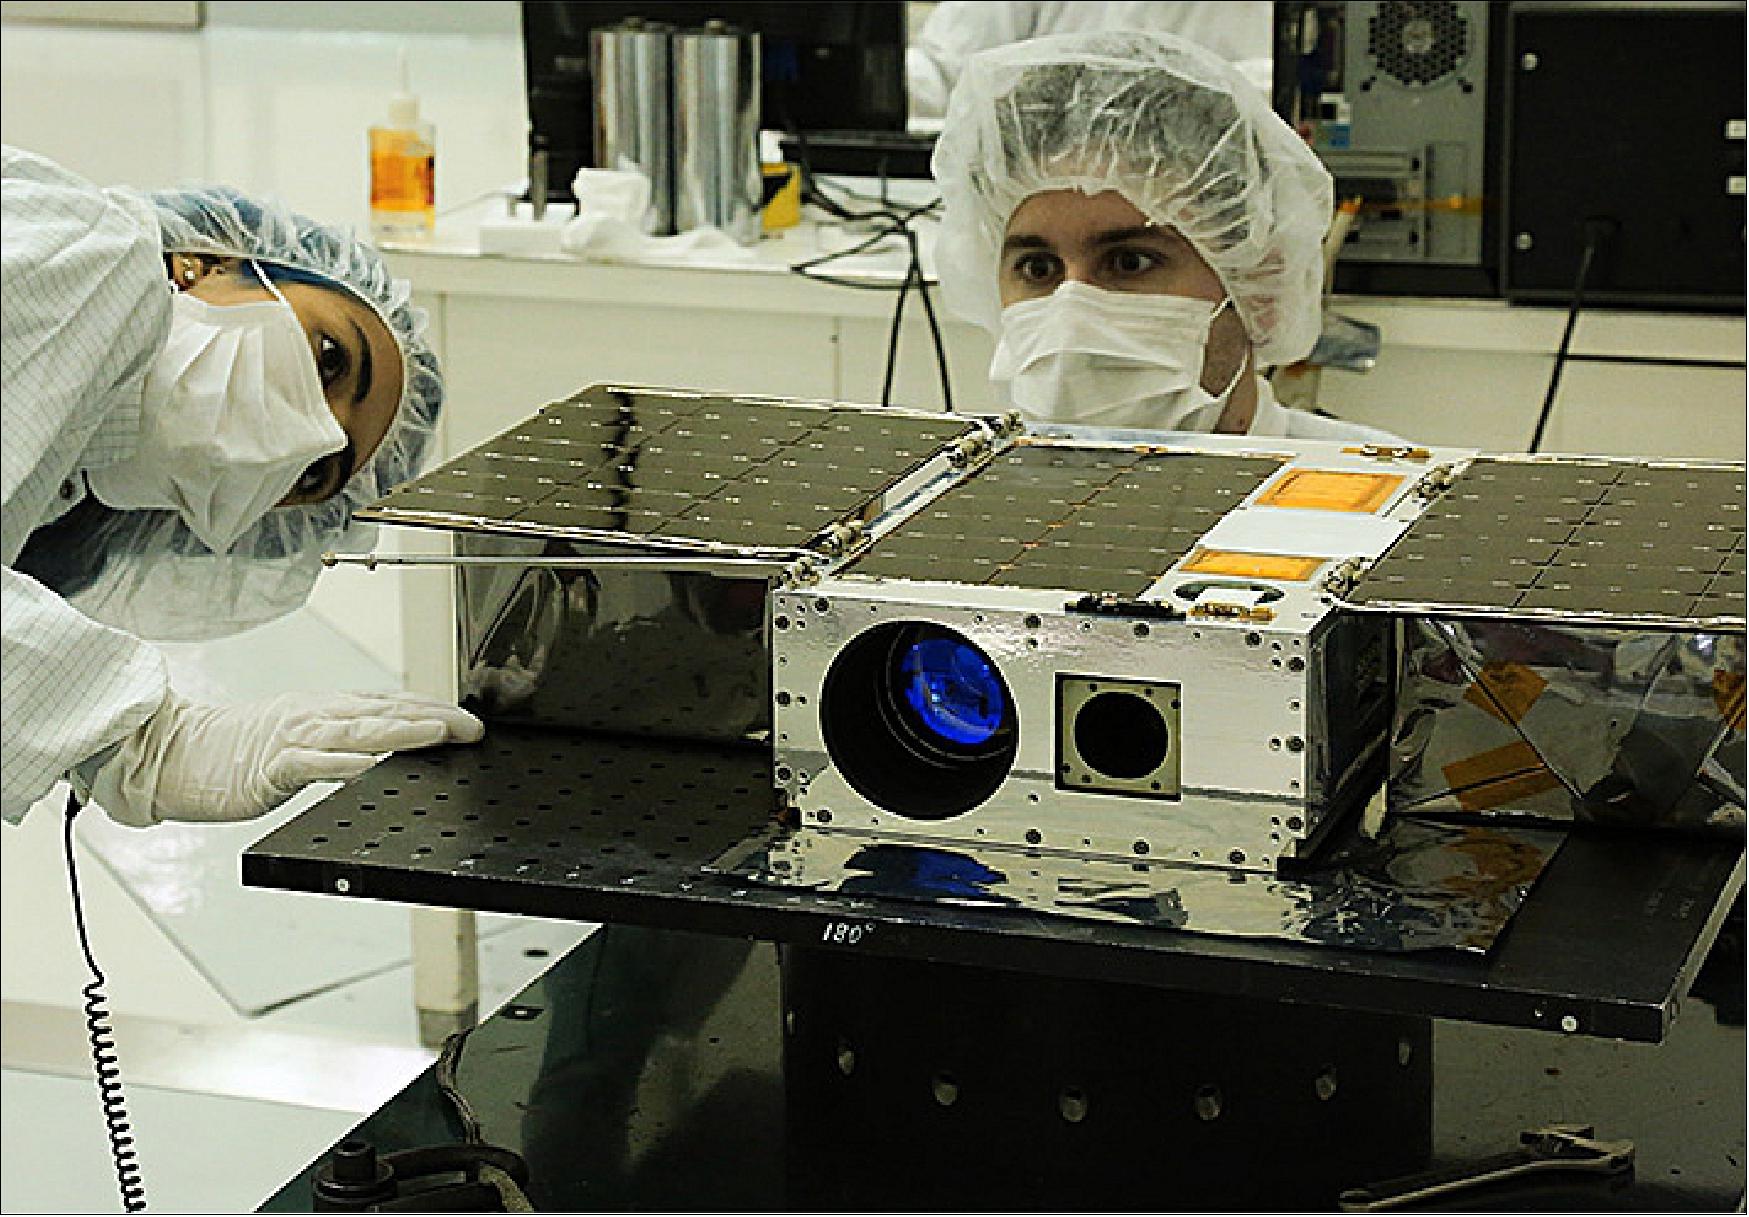 Figure 1: Electrical Test Engineer Esha Murty (left) and Integration and Test Lead Cody Colley (right) prepare the ASTERIA spacecraft for mass properties measurements in April 2017 prior to spacecraft delivery (image credit: NASA/JPL)